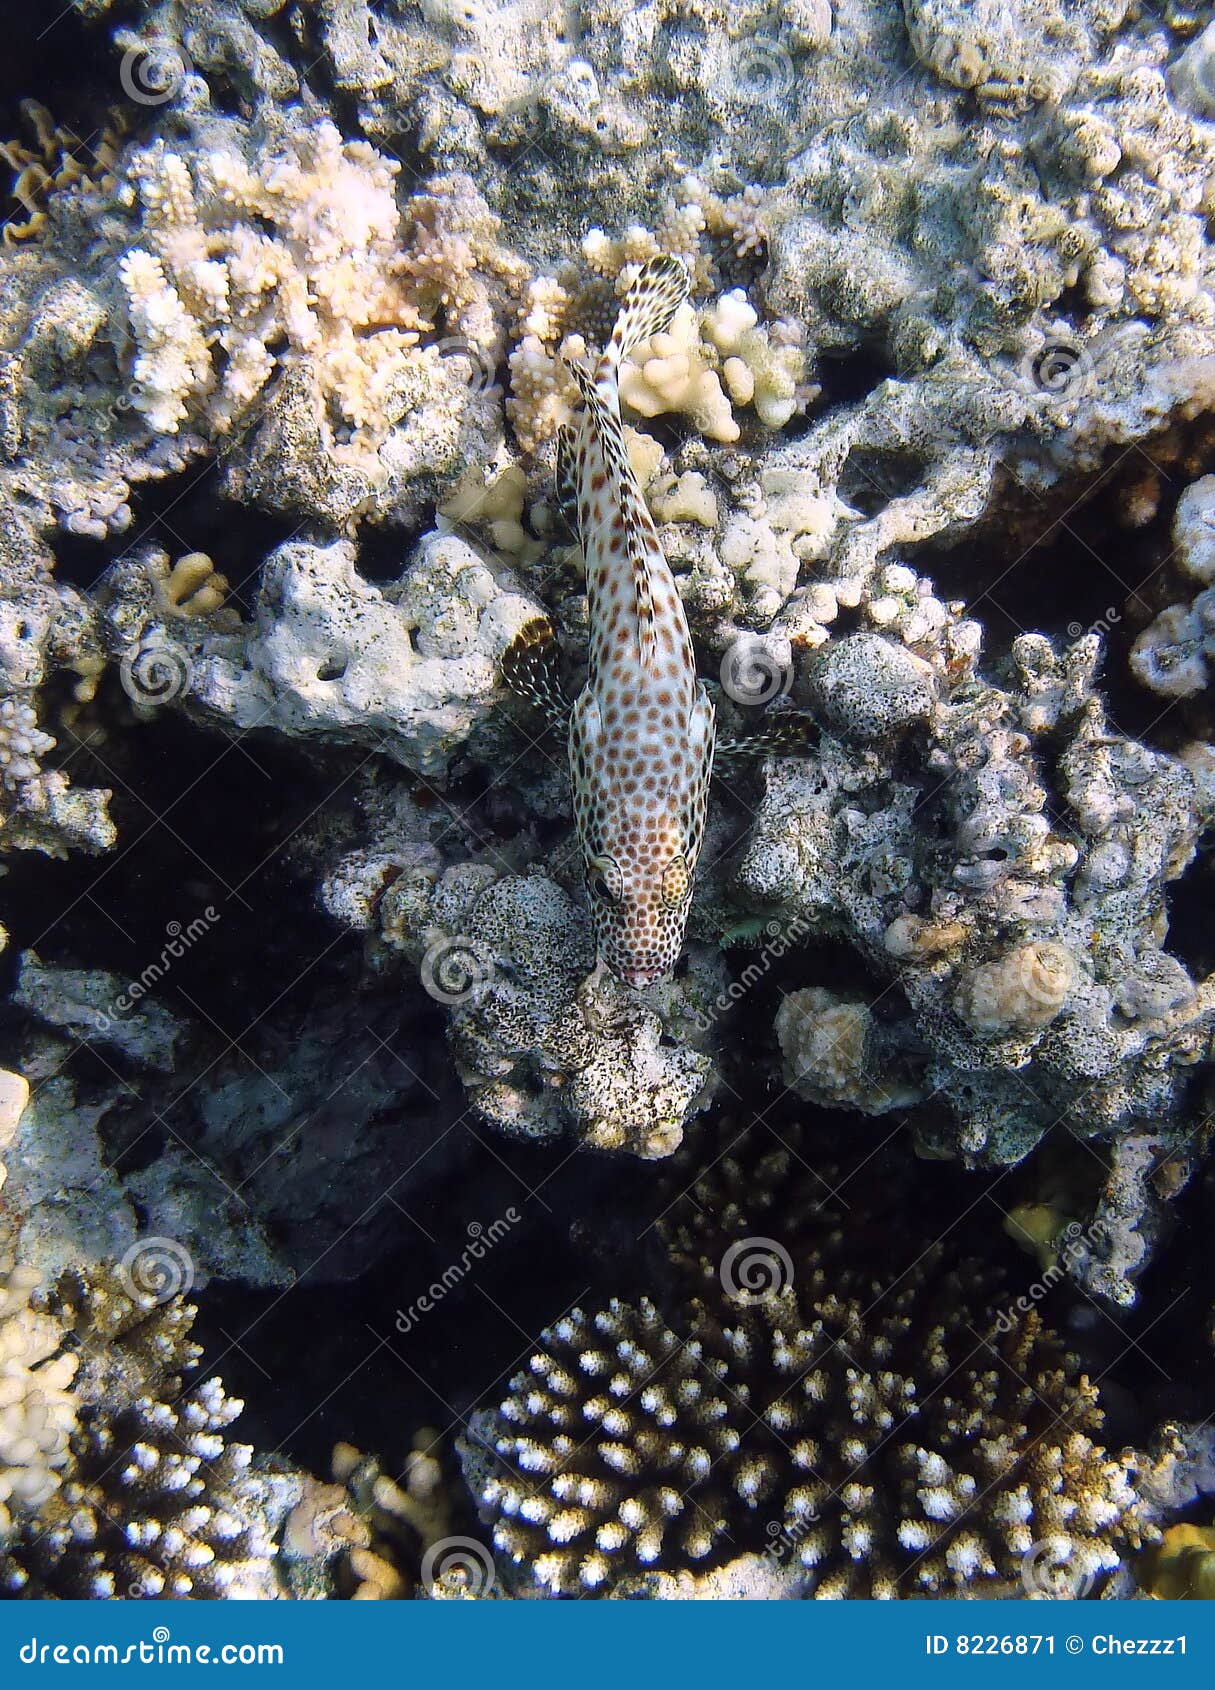 camouflaged fish and coral